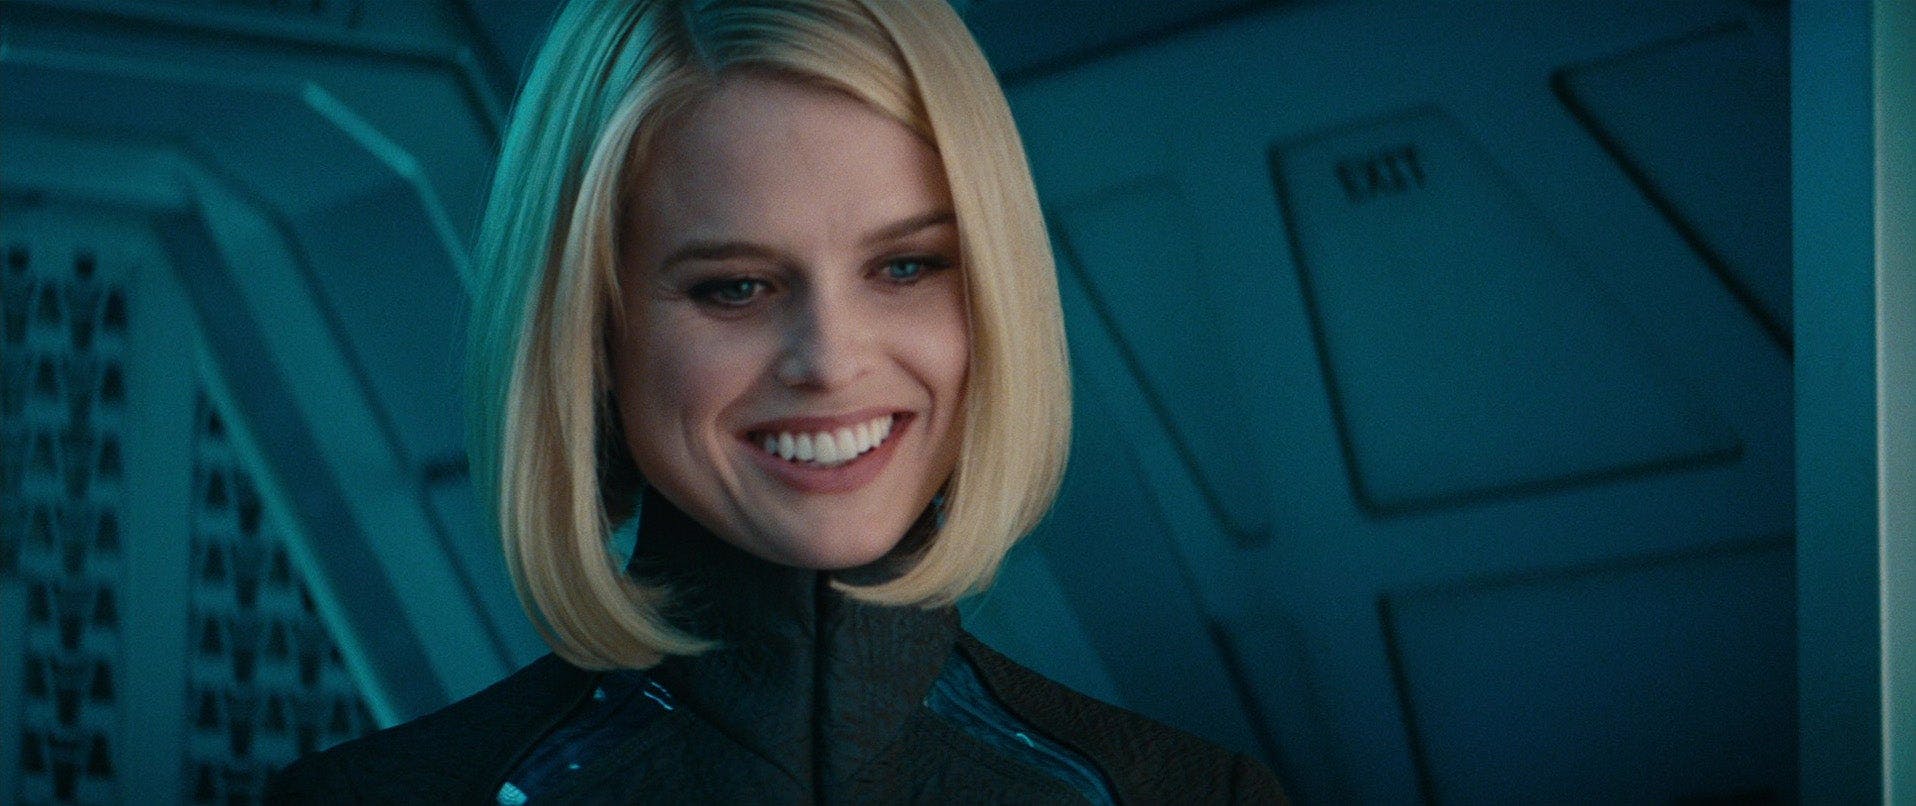 Carol Marcus smiles with her head tilted downward on Star Trek Into Darkness